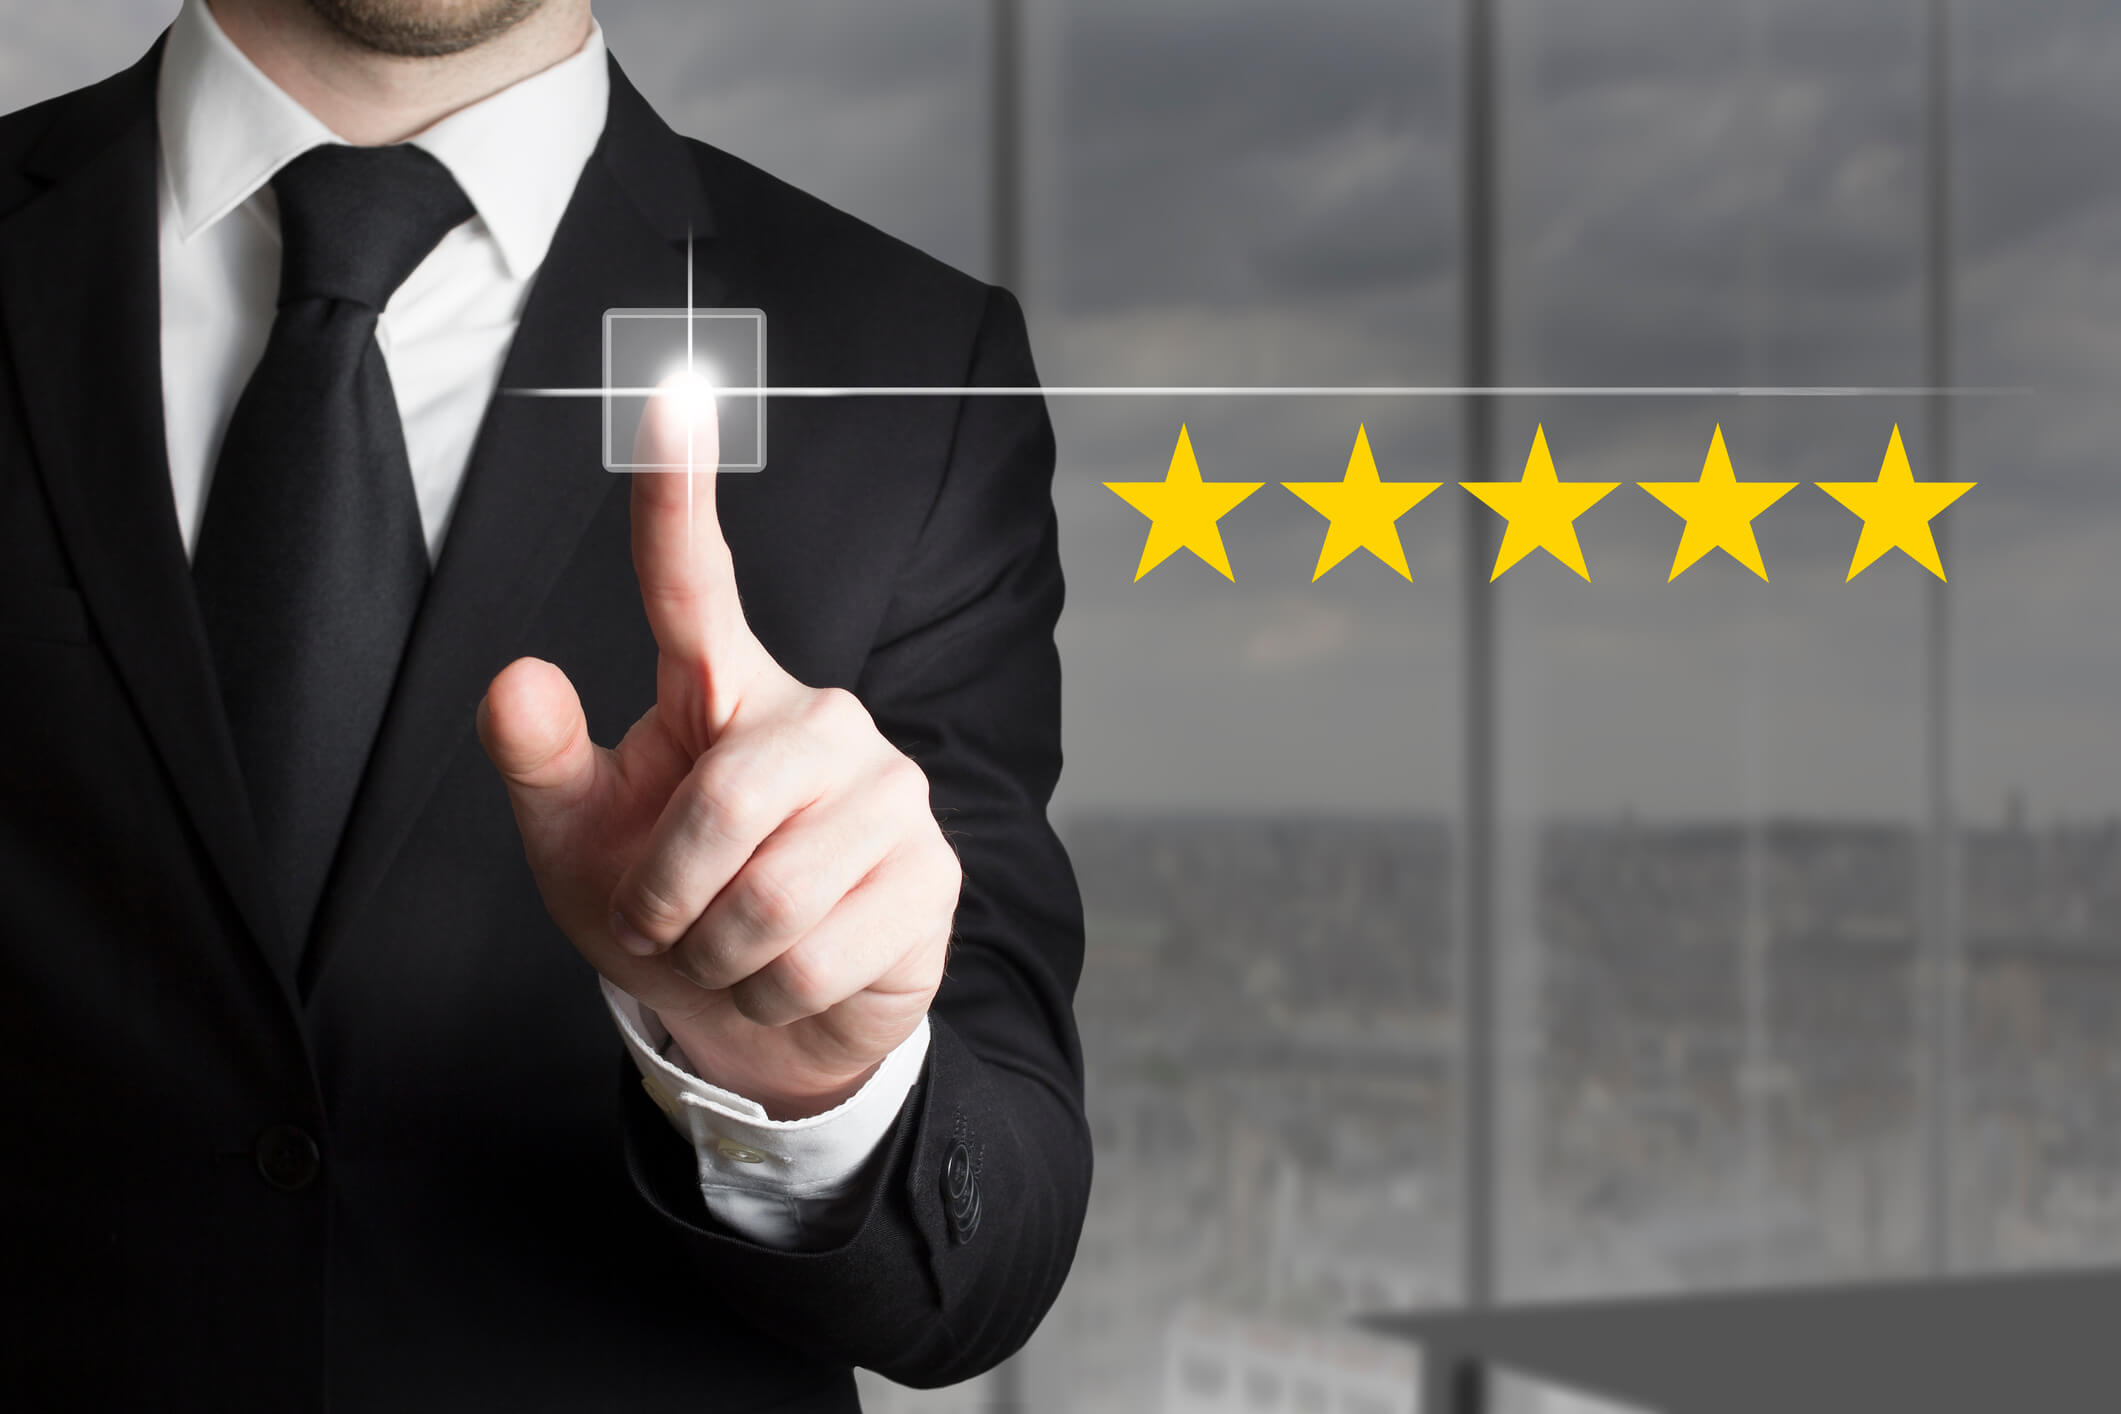 effective marketing to business travelers requires great reviews by previous corporate travelers